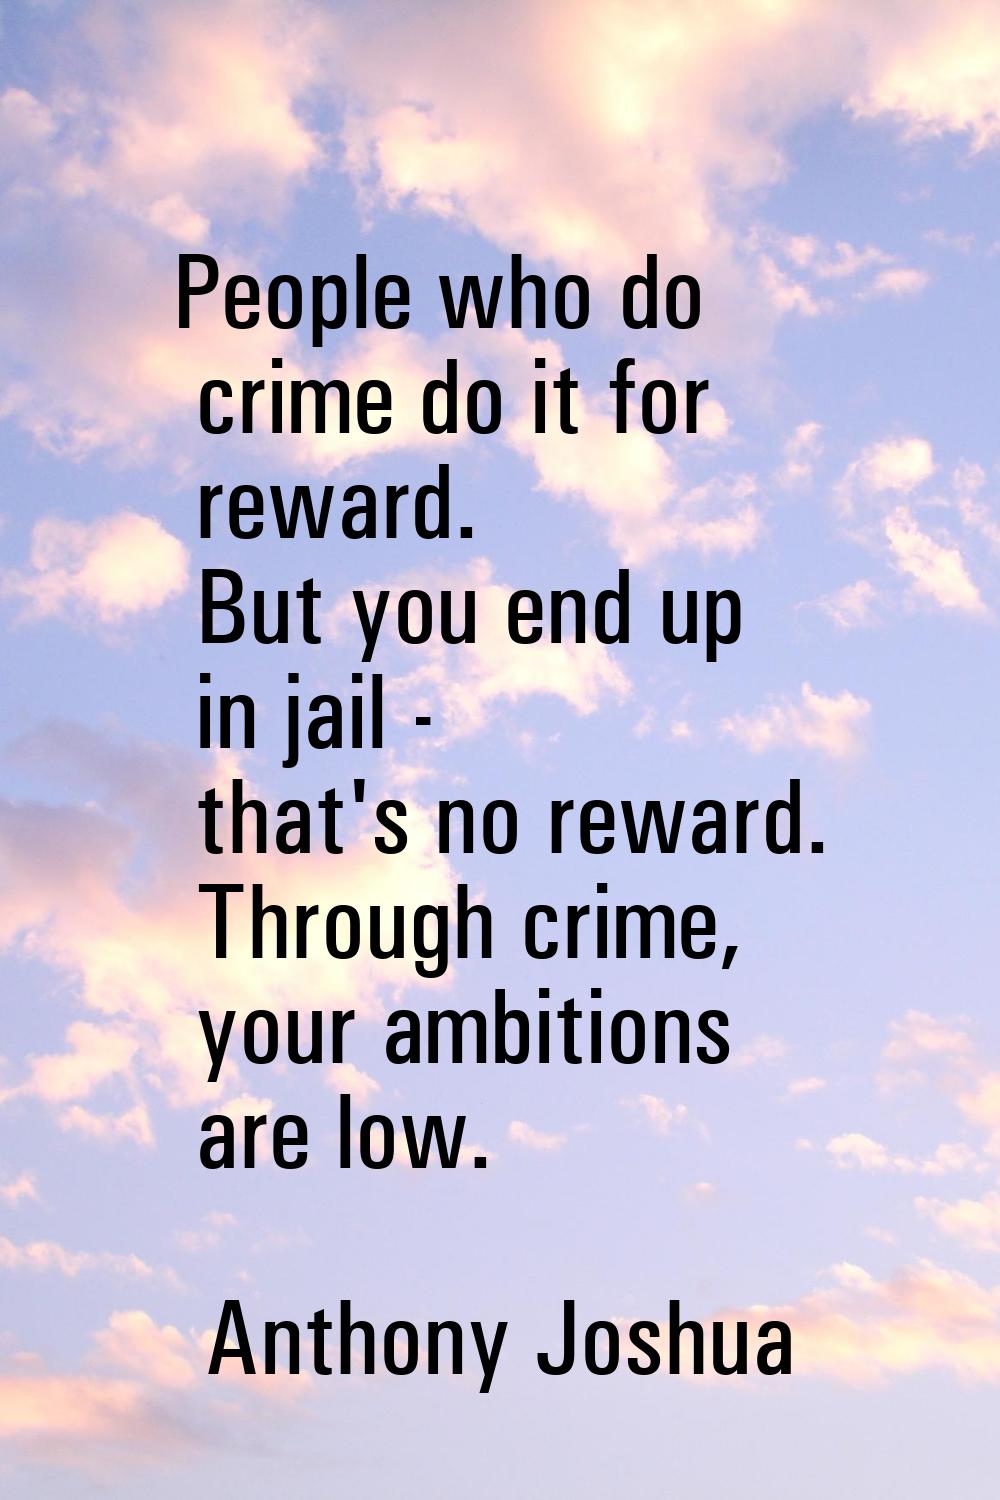 People who do crime do it for reward. But you end up in jail - that's no reward. Through crime, you